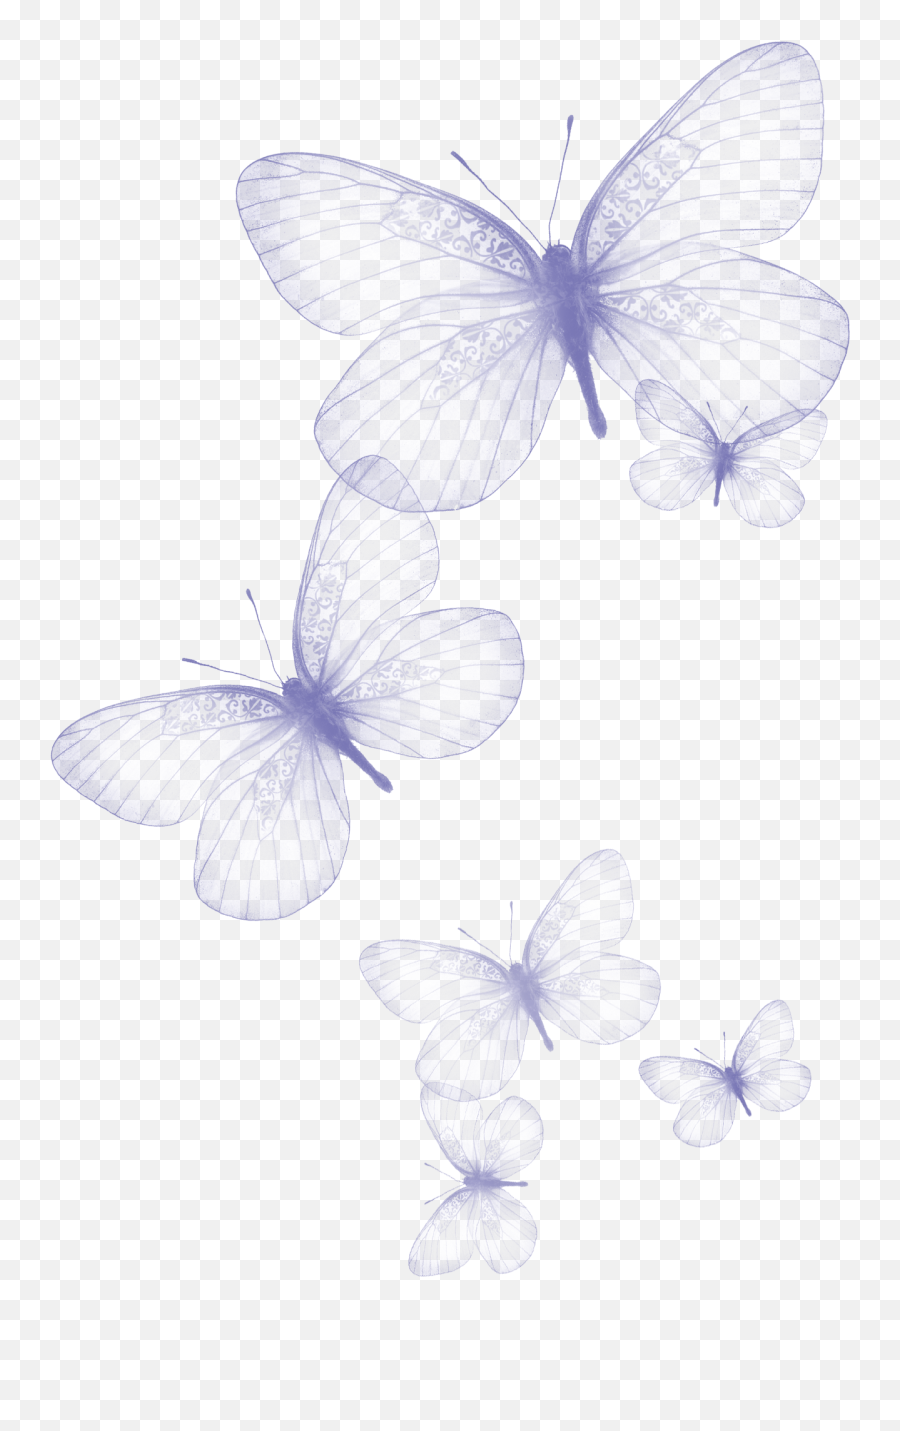 Transparent Butterfly Wallpapers - Top Free Transparent Emoji,Blue Butterfly Emoji